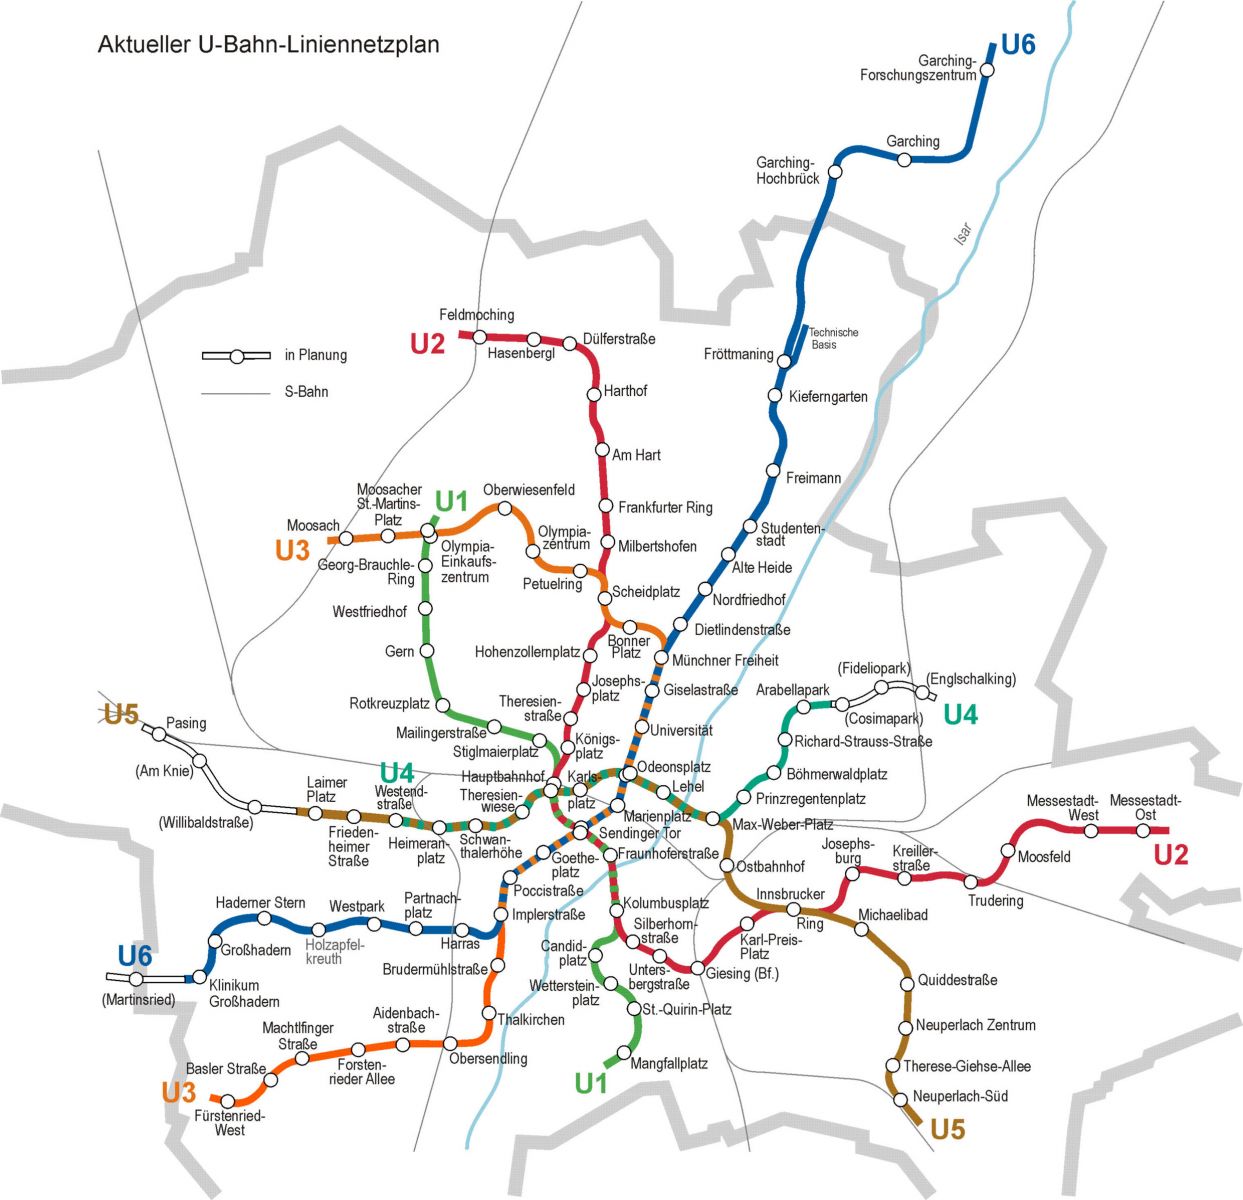 Urban transit map in German. Shows 6 transit lines, U1–U6, radiating out from the city center.